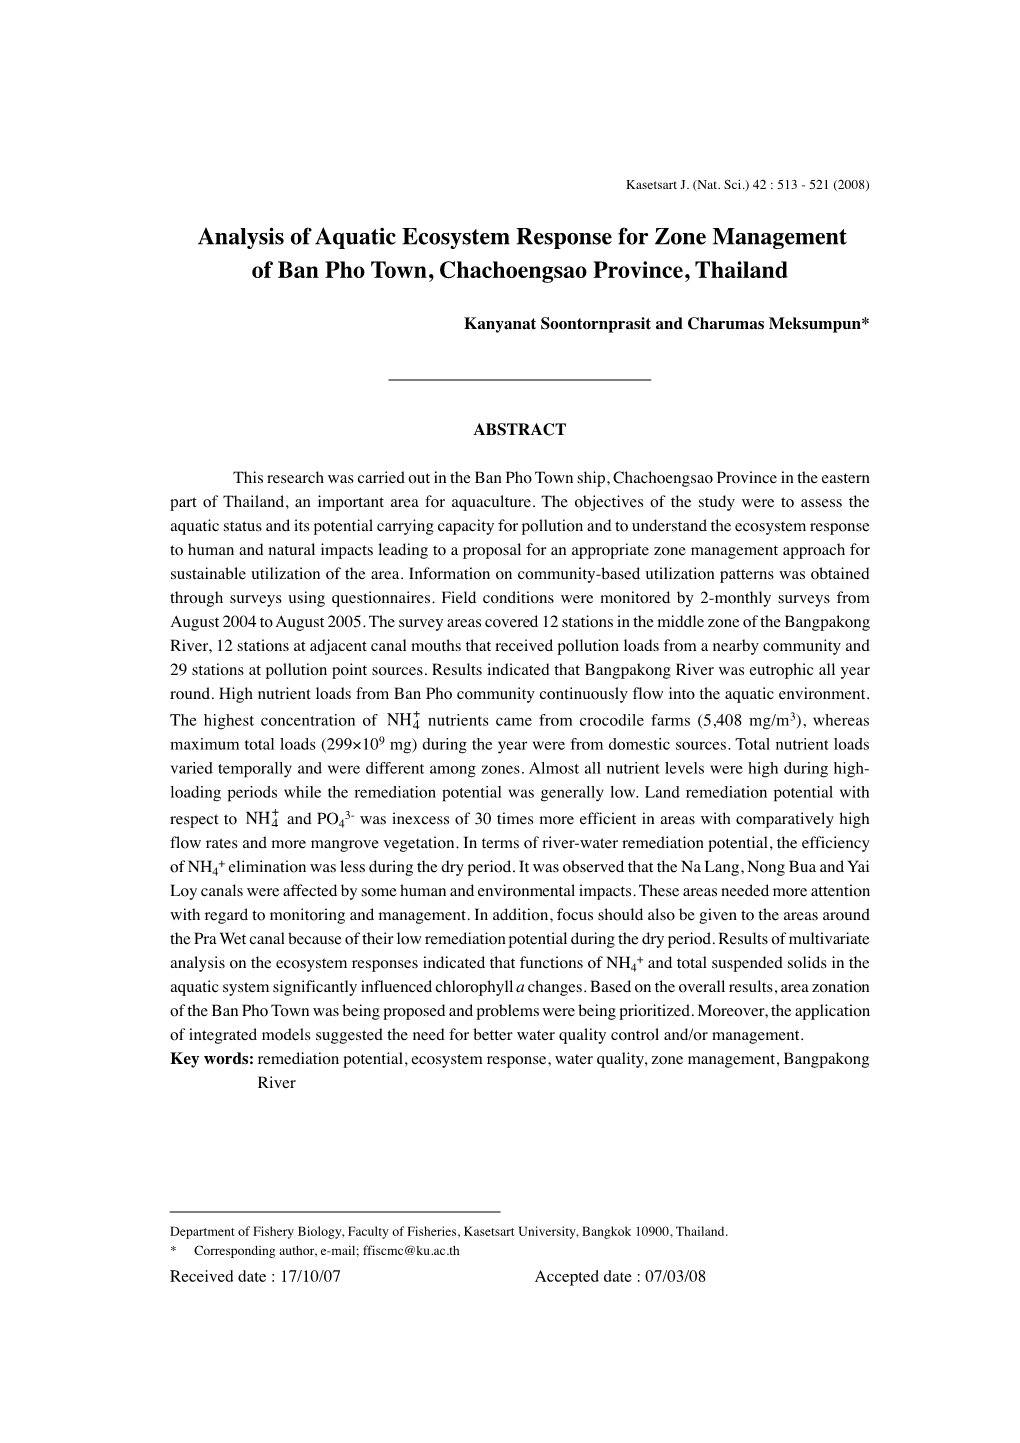 Analysis of Aquatic Ecosystem Response for Zone Management of Ban Pho Town, Chachoengsao Province, Thailand